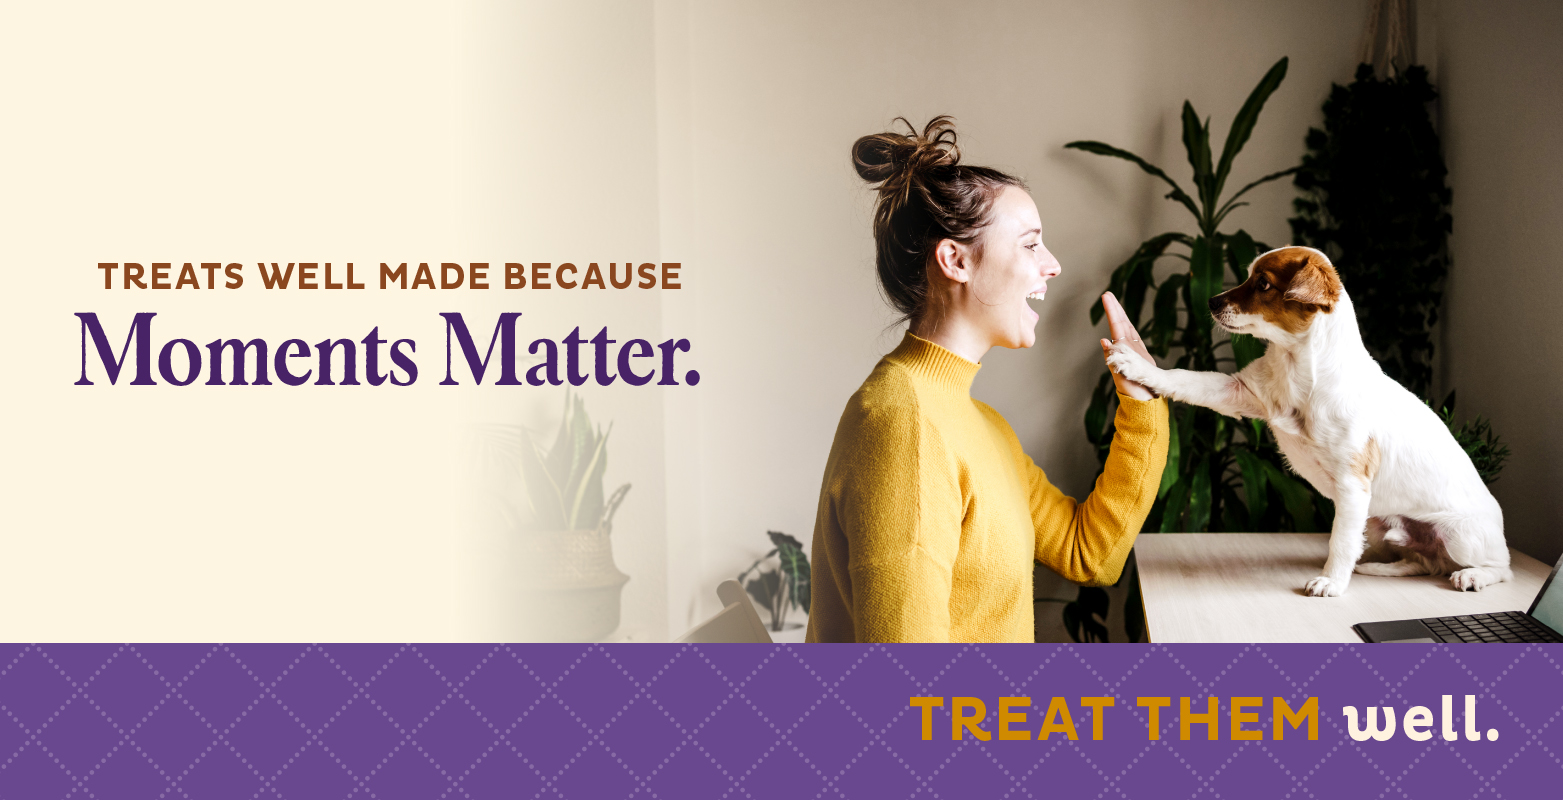 Treats Well Made Because Moments Matter. Treat Them Well.